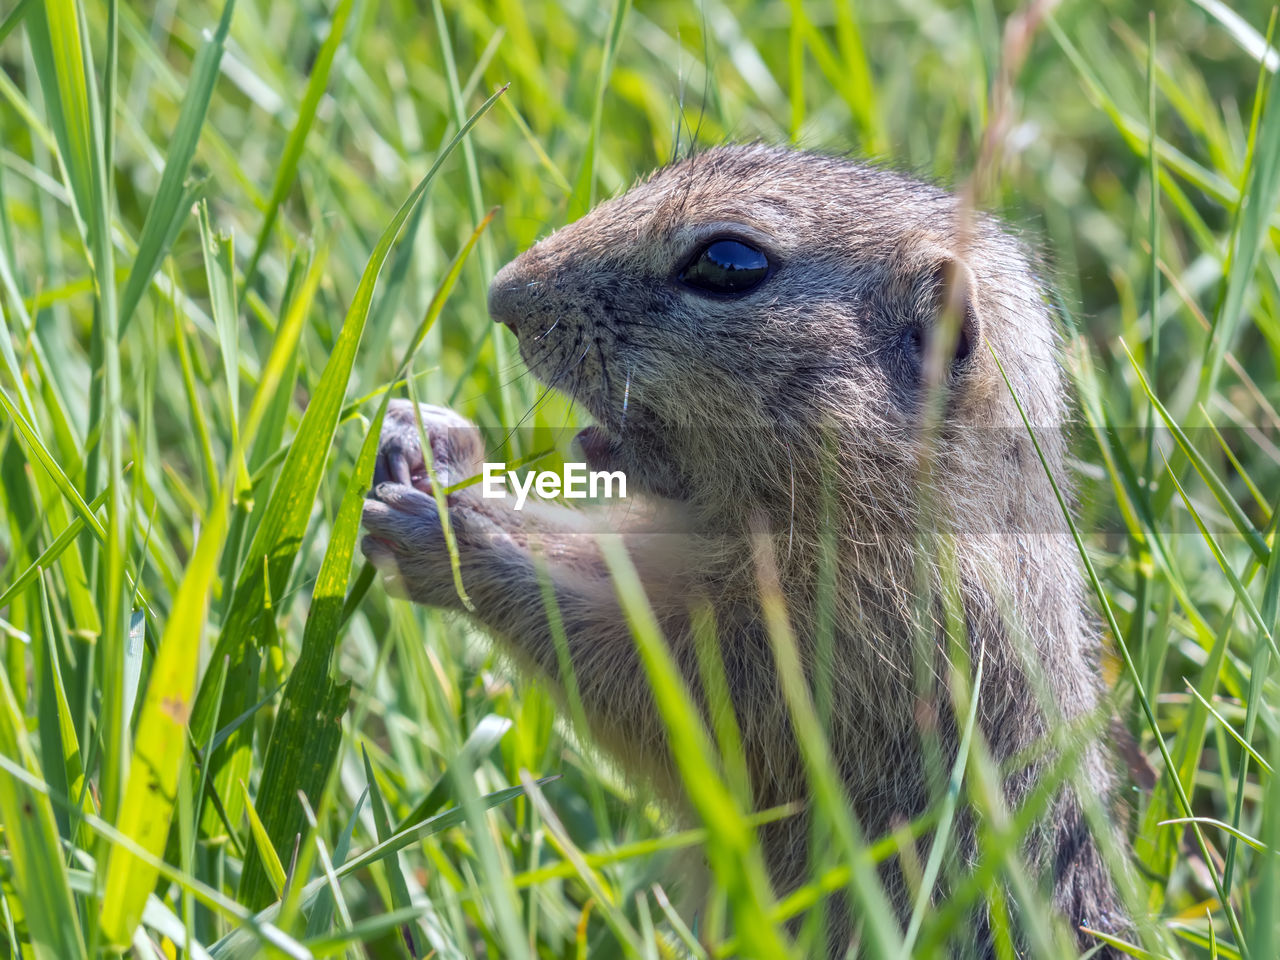 animal, animal themes, animal wildlife, one animal, wildlife, grass, mammal, plant, nature, no people, squirrel, whiskers, rodent, close-up, prairie dog, day, green, eating, outdoors, land, field, prairie, focus on foreground, animal body part